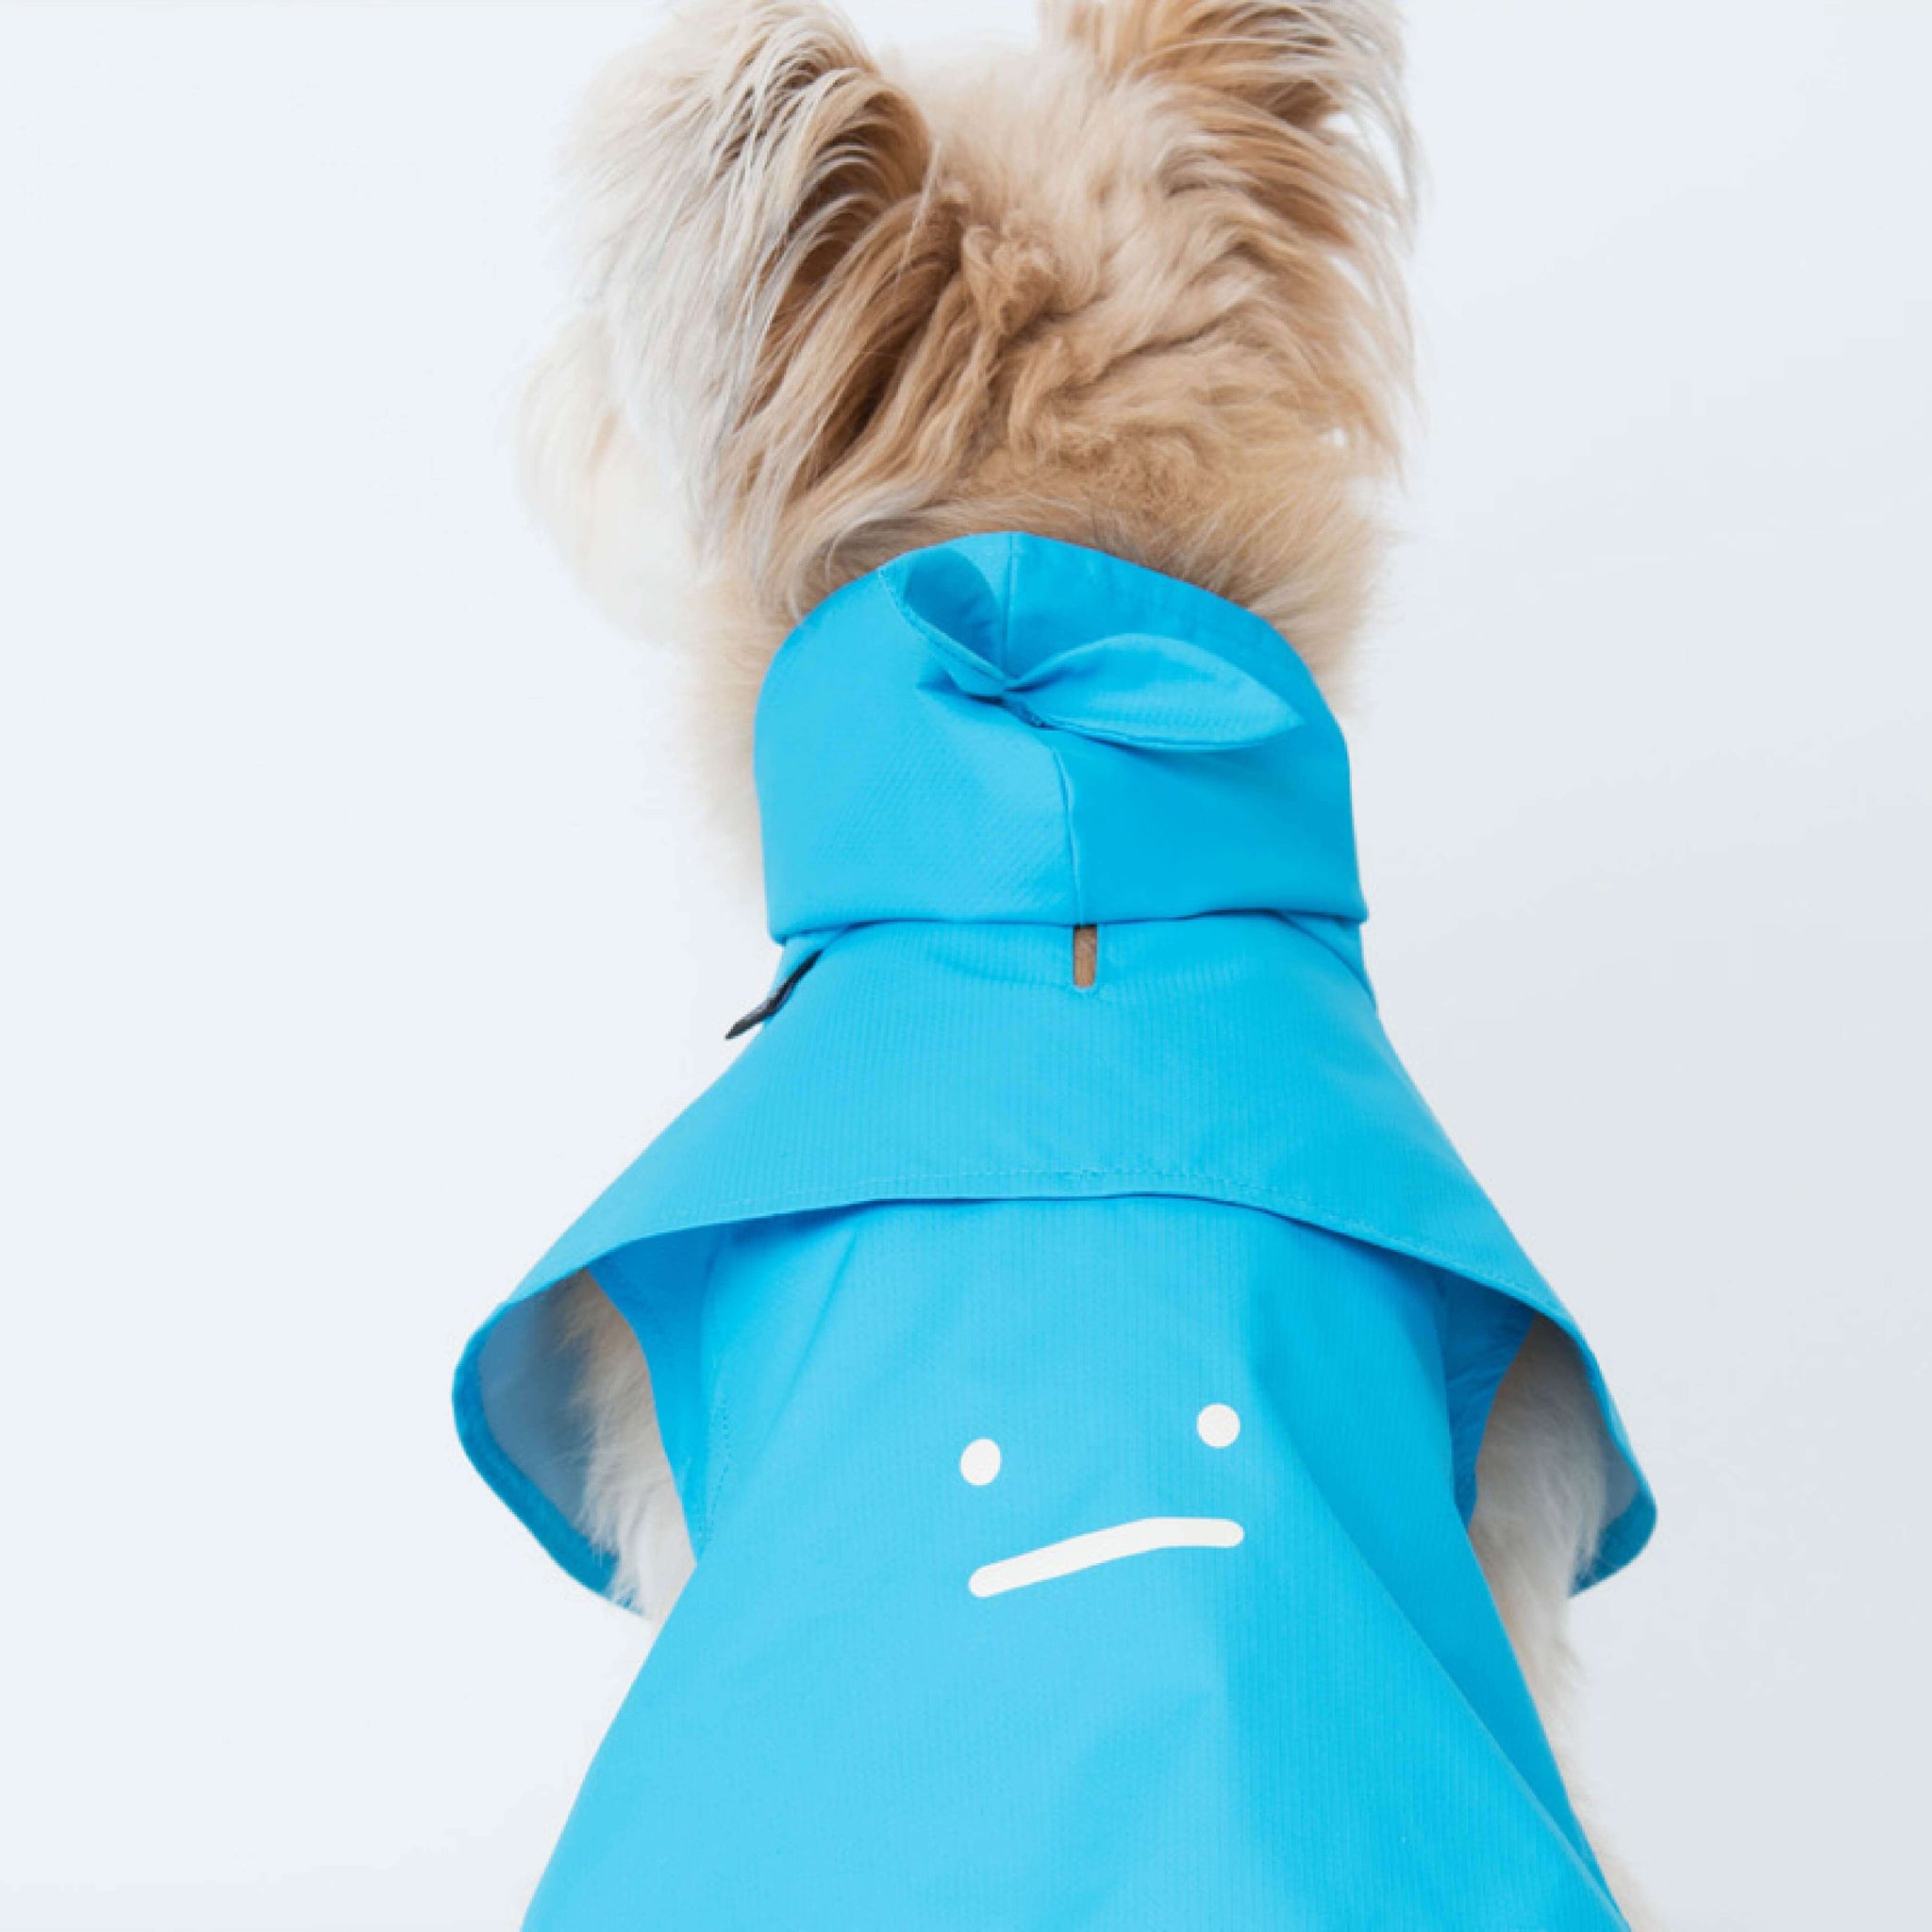 Raincoat for walking on a rainy day. Model is wearing a L & weighs 11 pounds (5 kg).